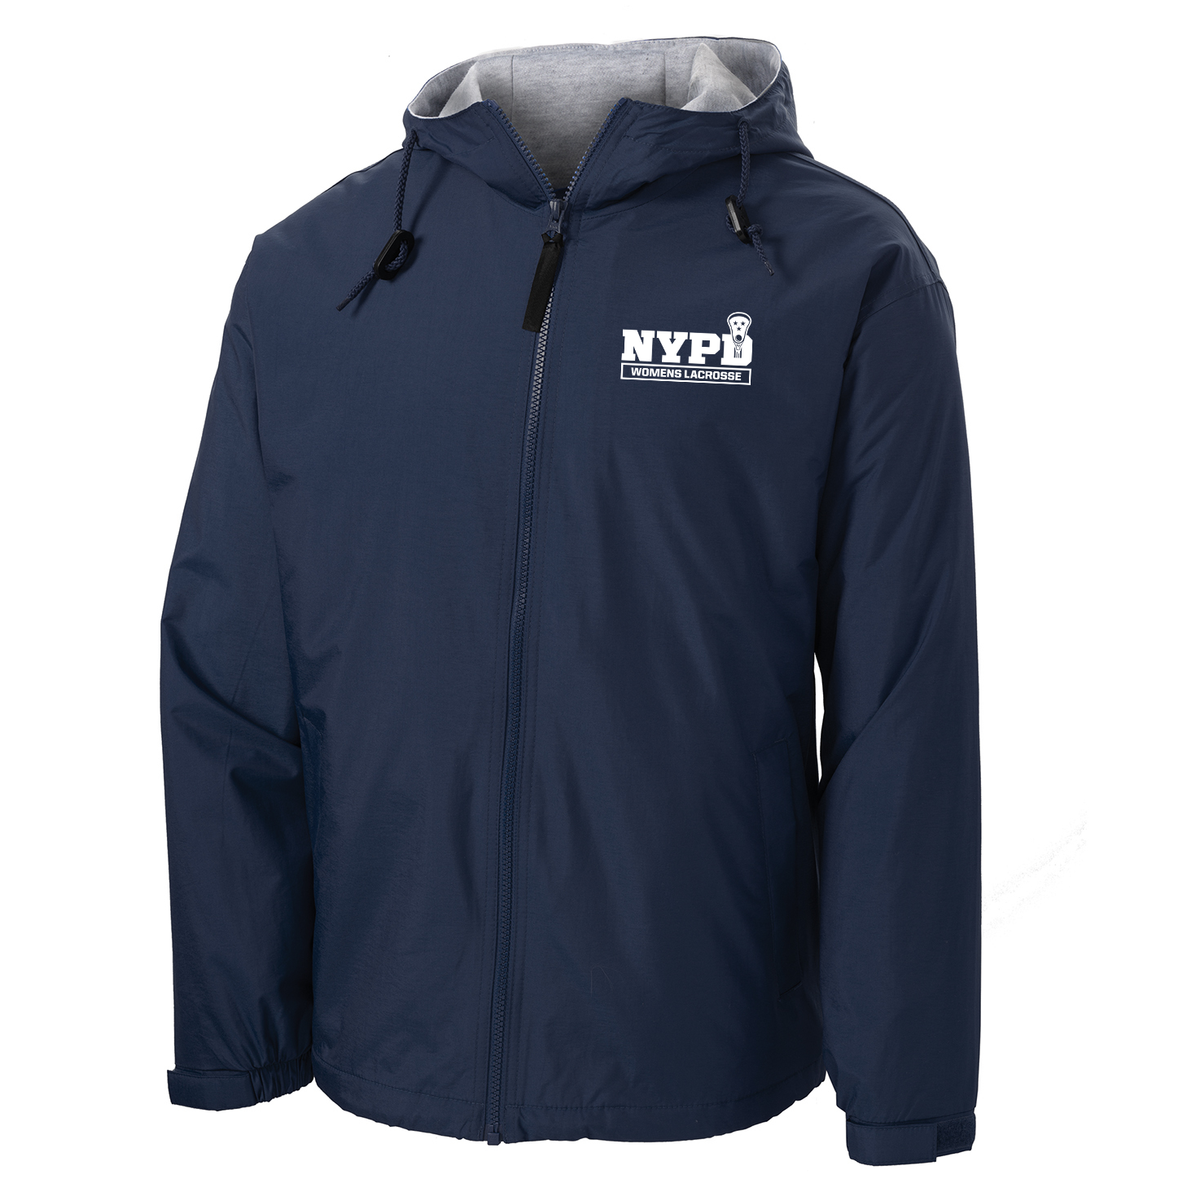 NYPD Womens Lacrosse Hooded Jacket